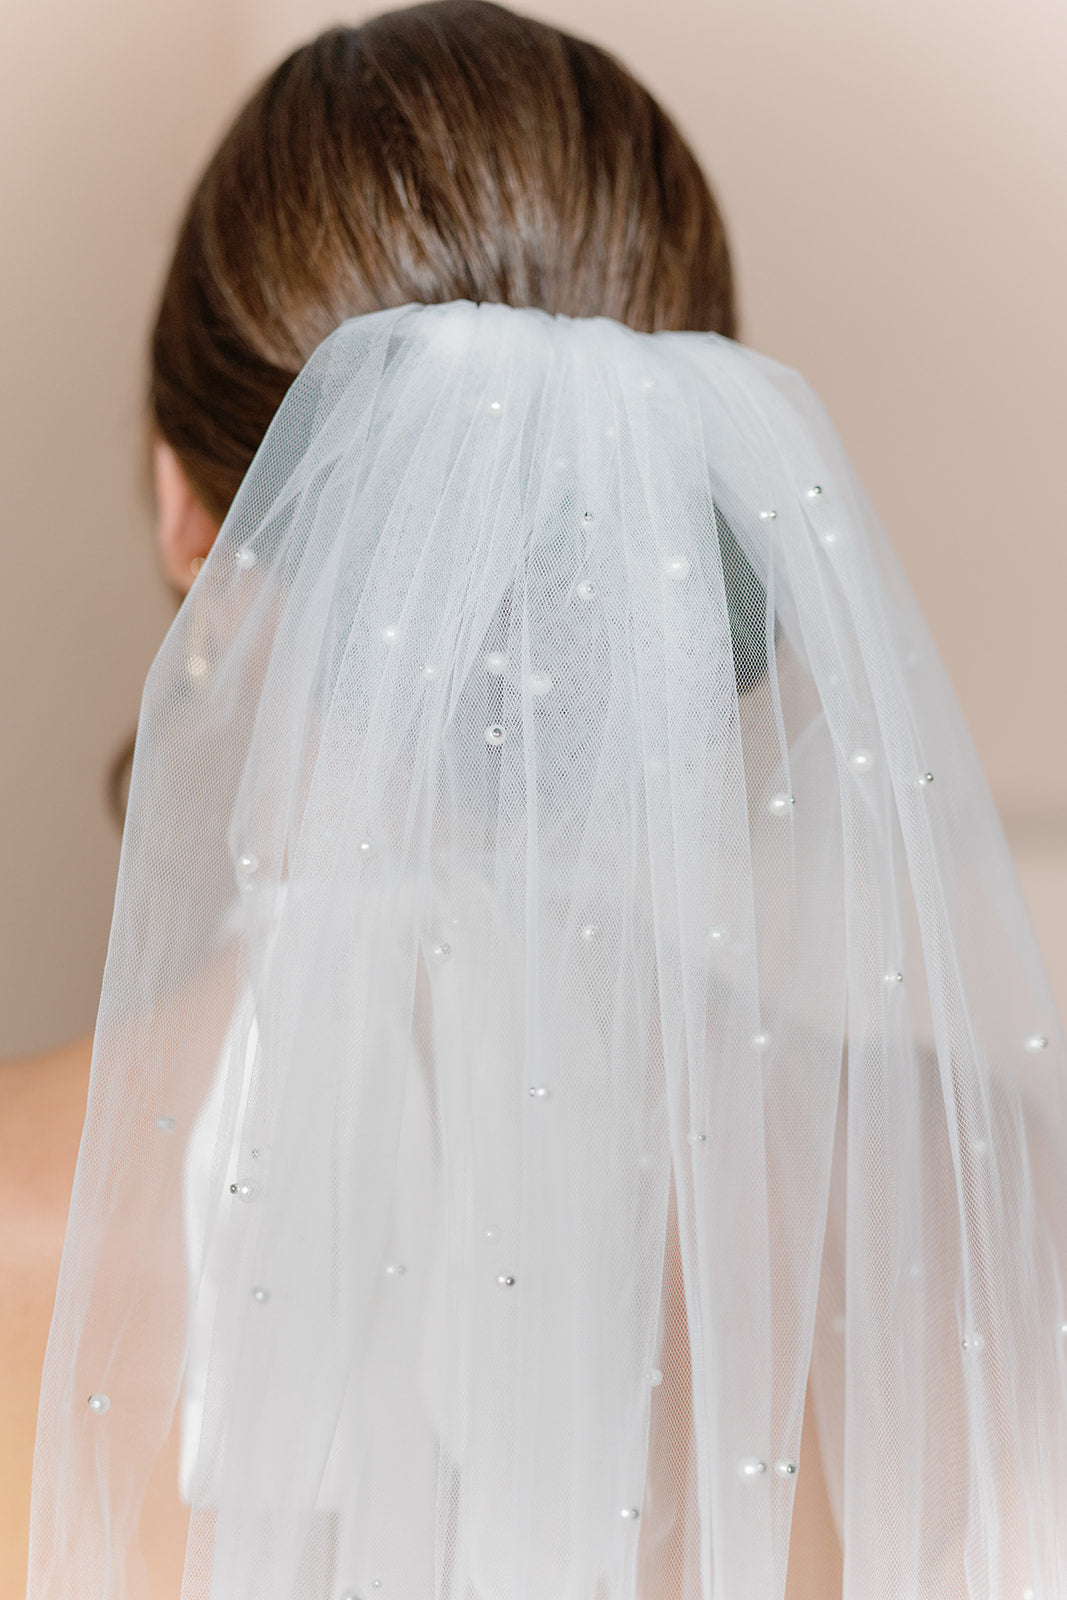 https://cdn.shopify.com/s/files/1/0557/7988/5156/products/tulle-pearl-veil_lifestyle_main-hover.jpg?v=1674491616